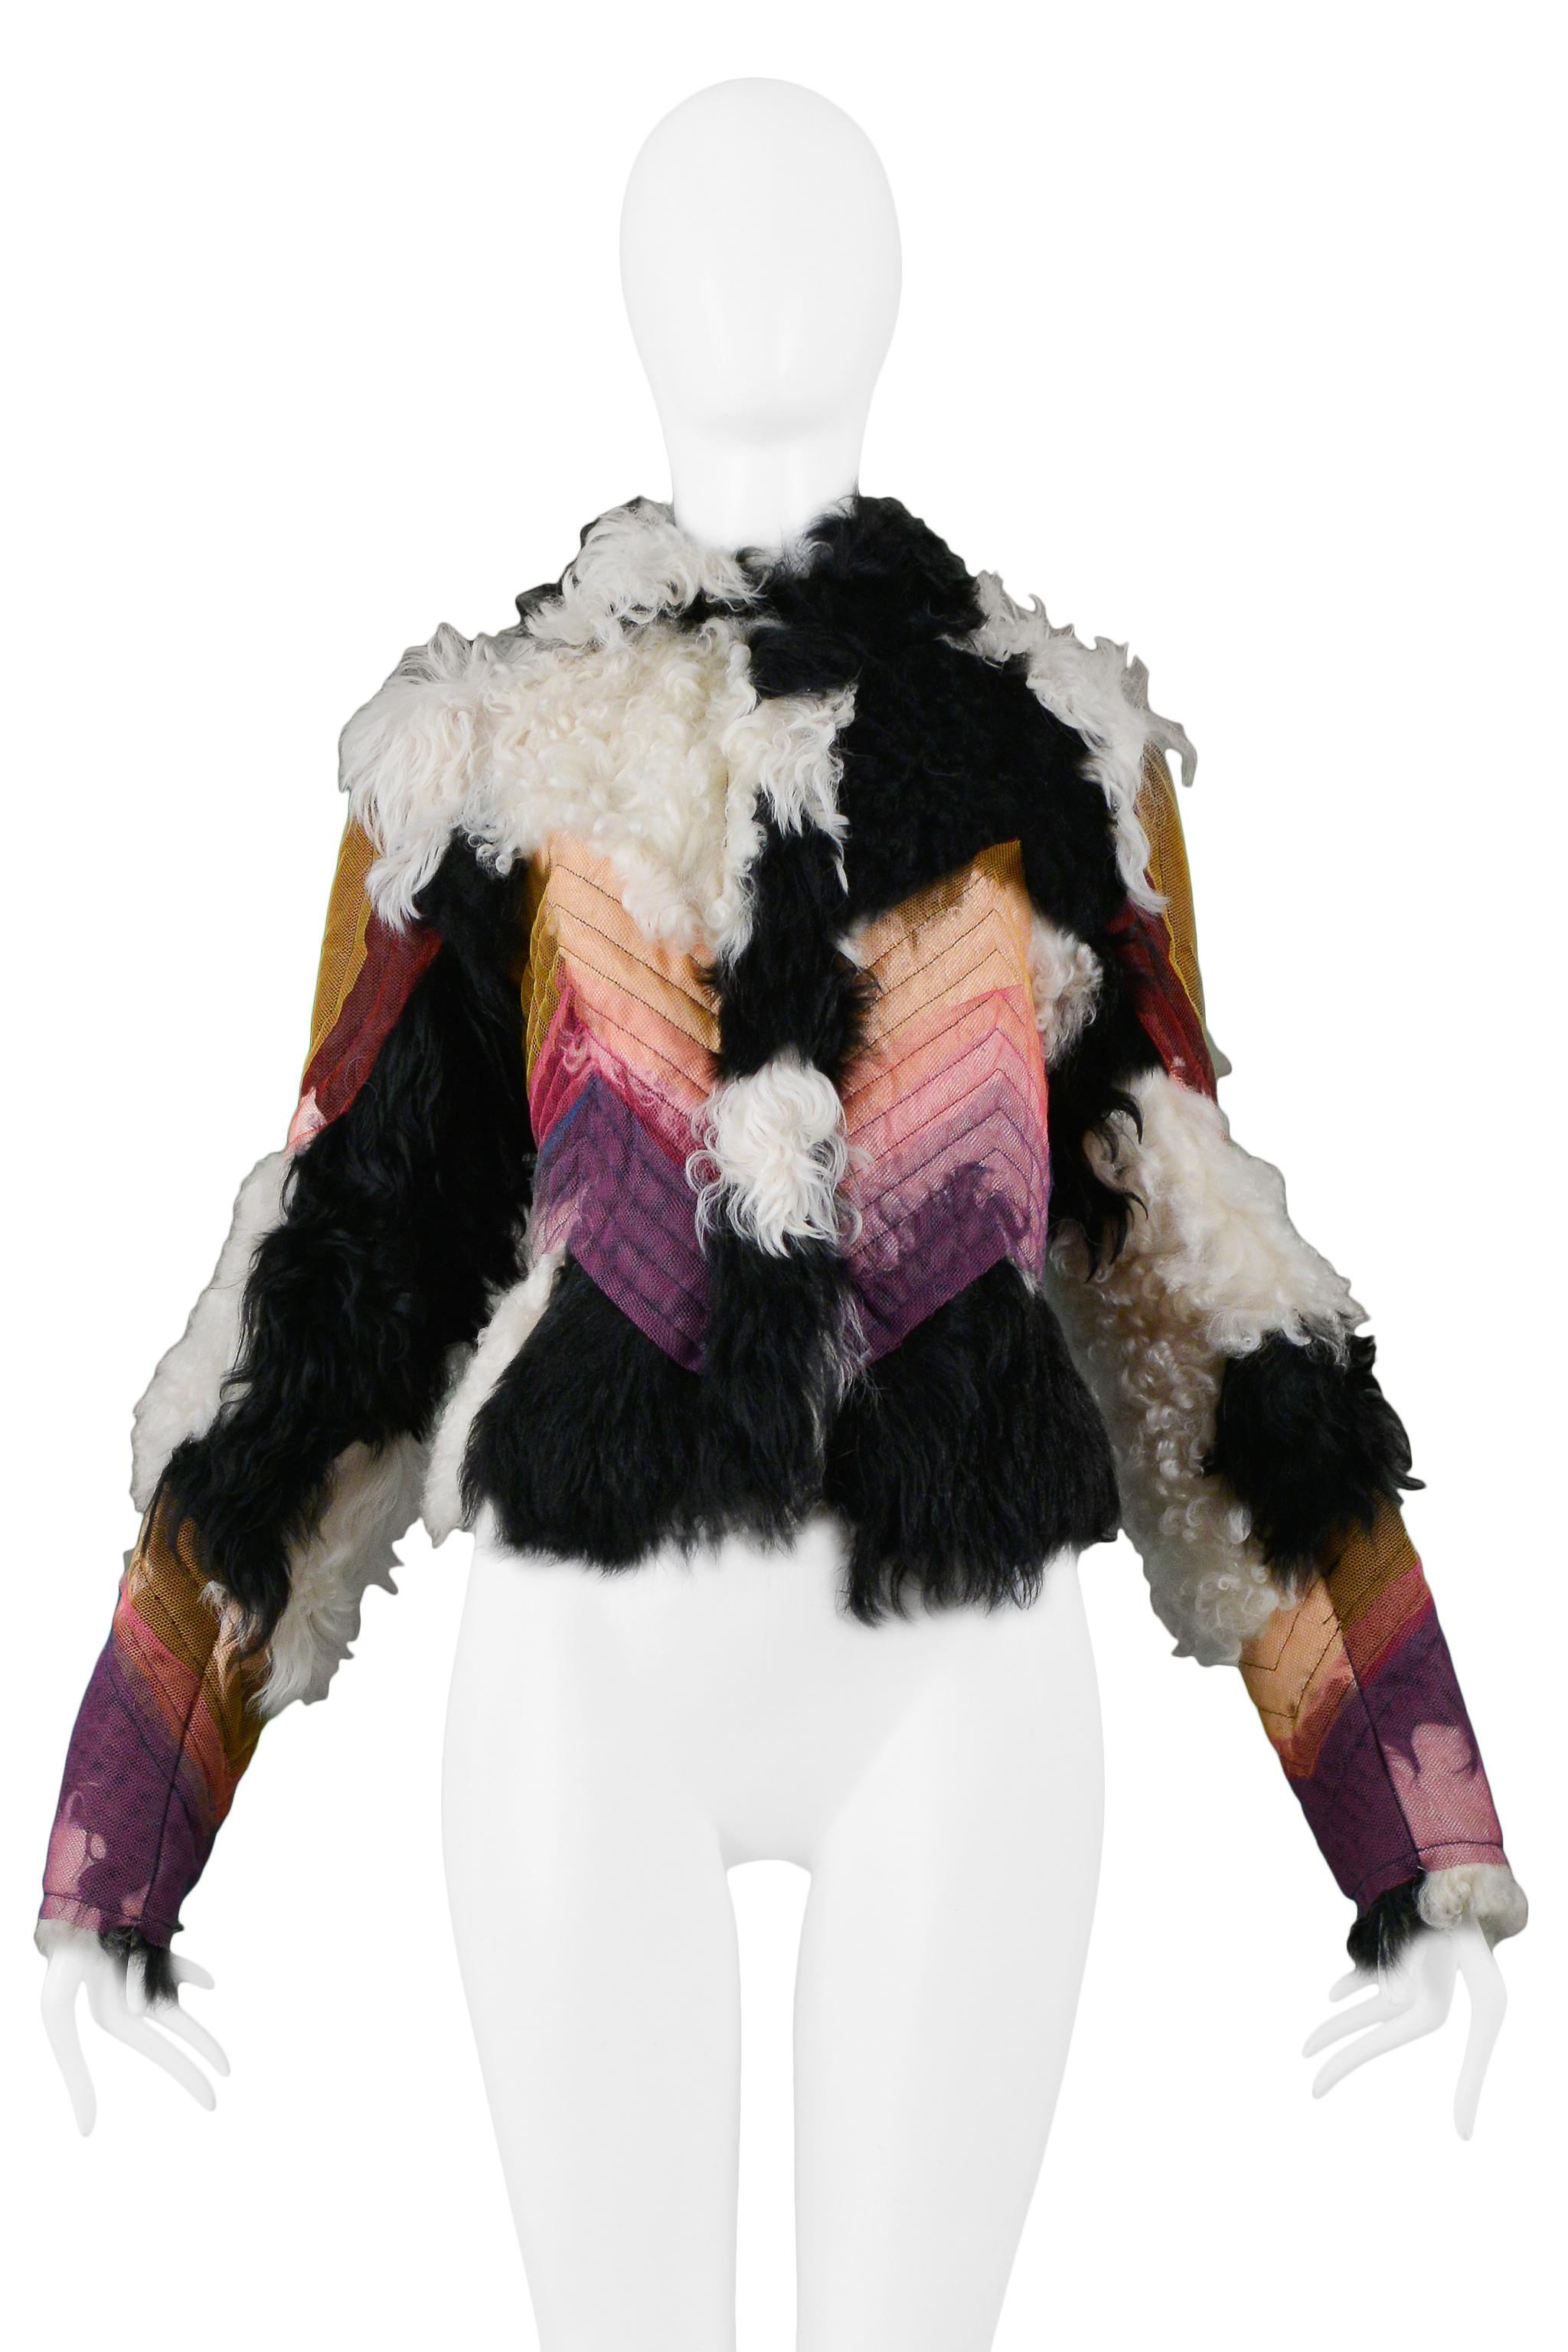 Vintage Christian Dior black and white lamb shearling jacket featuring a multicolor sheer panel overlay at front and back waist and sleeves with chevron stitching. Collection 2001.

Excellent Vintage Condition.

Size: 38

Measurements: Shoulder